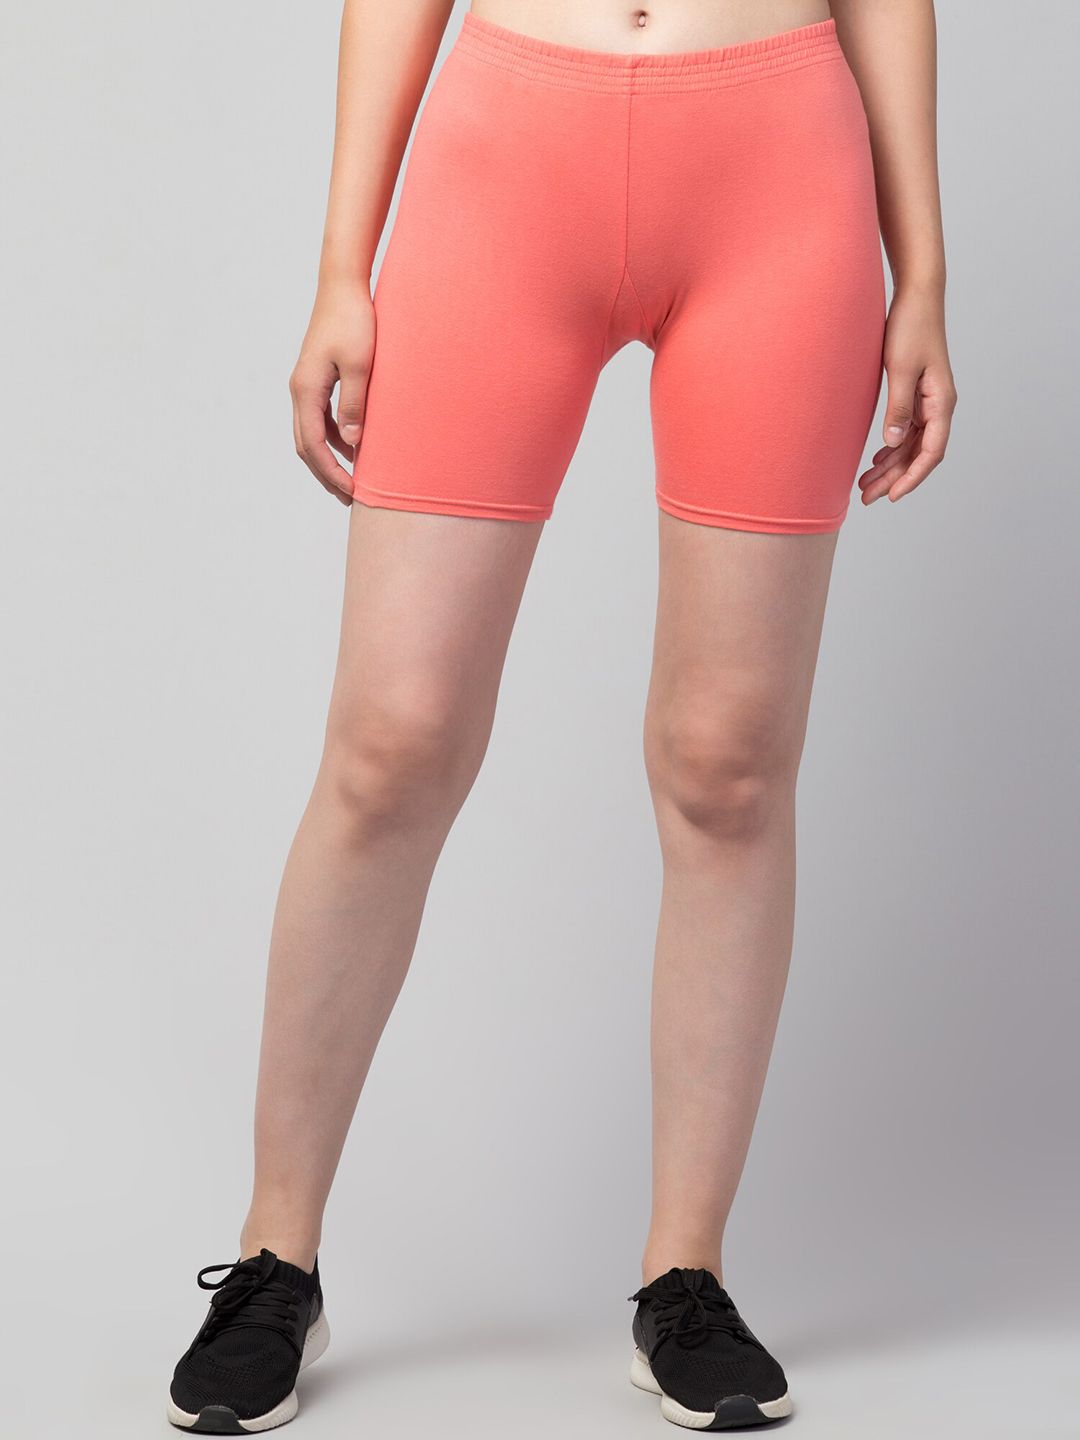 Apraa & Parma Women Peach-Coloured Slim Fit Cycling Sports Shorts Price in India